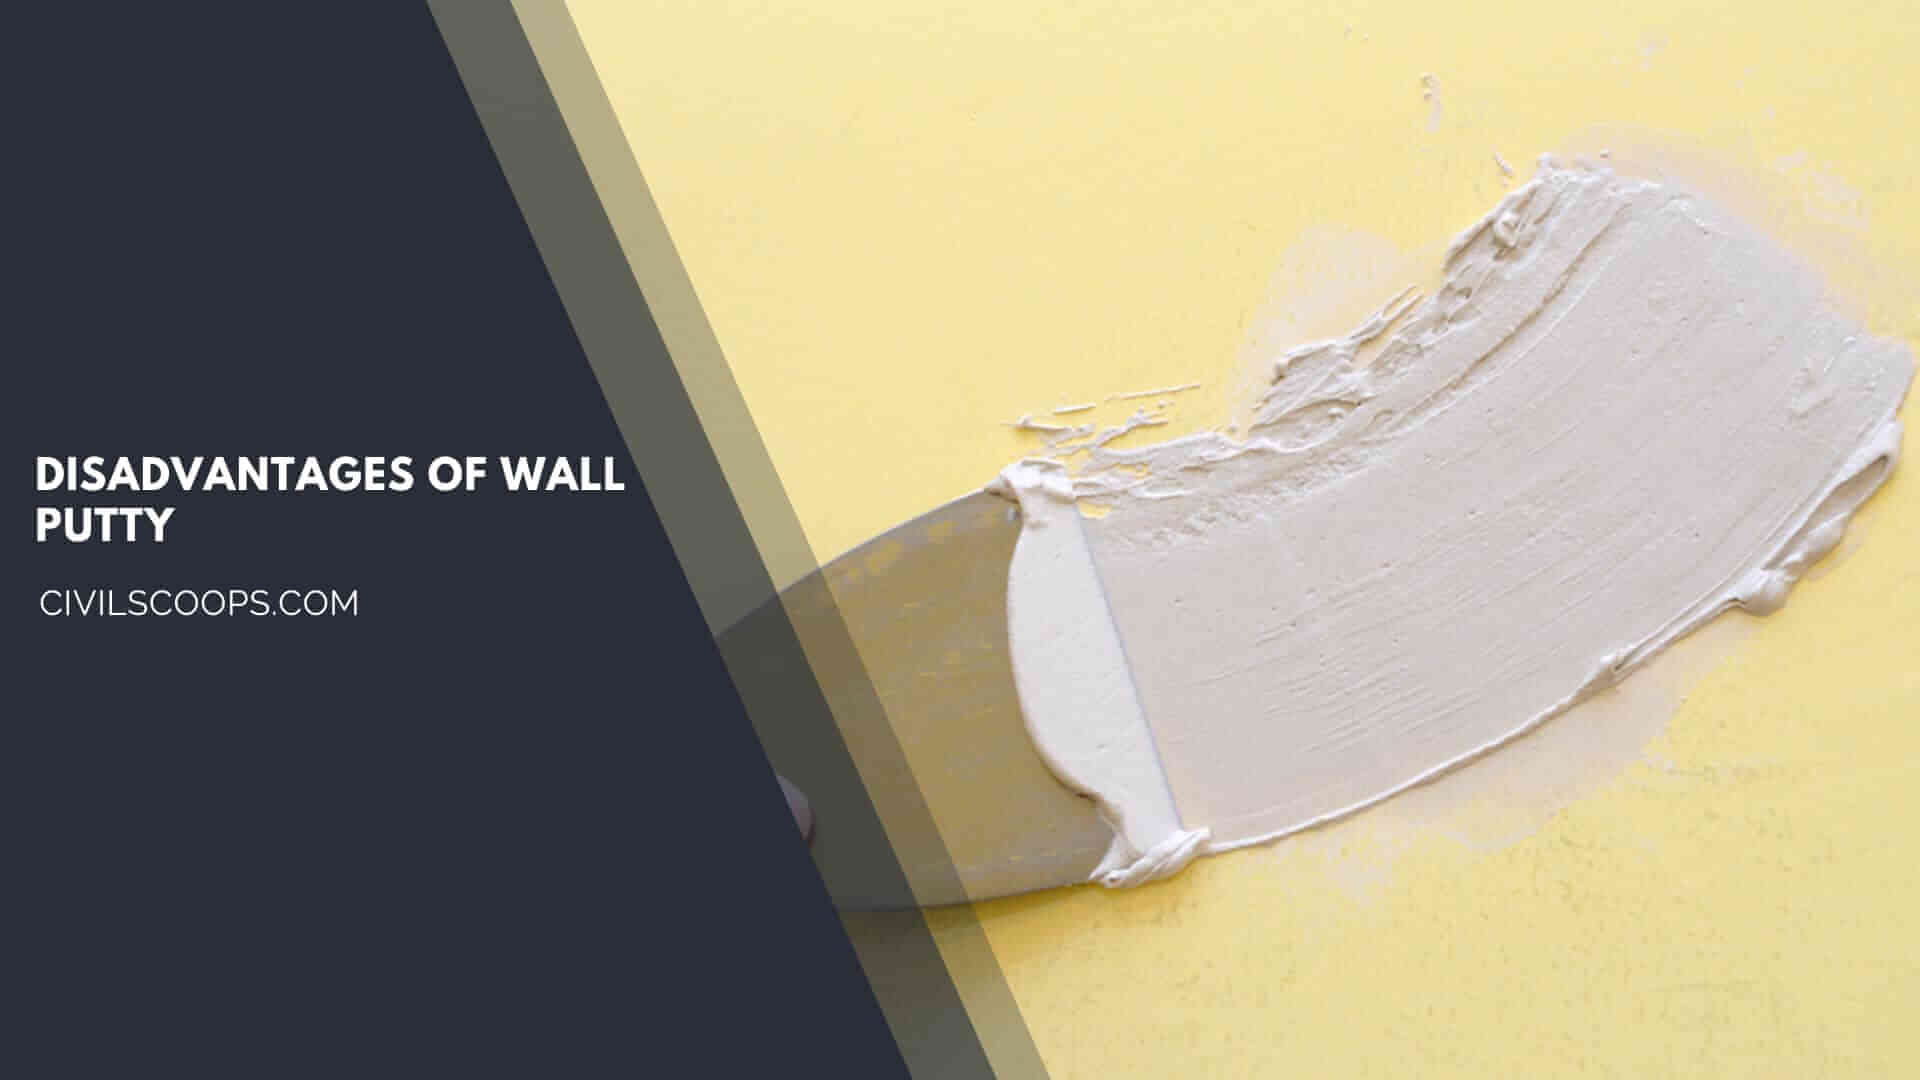 Disadvantages of Wall Putty